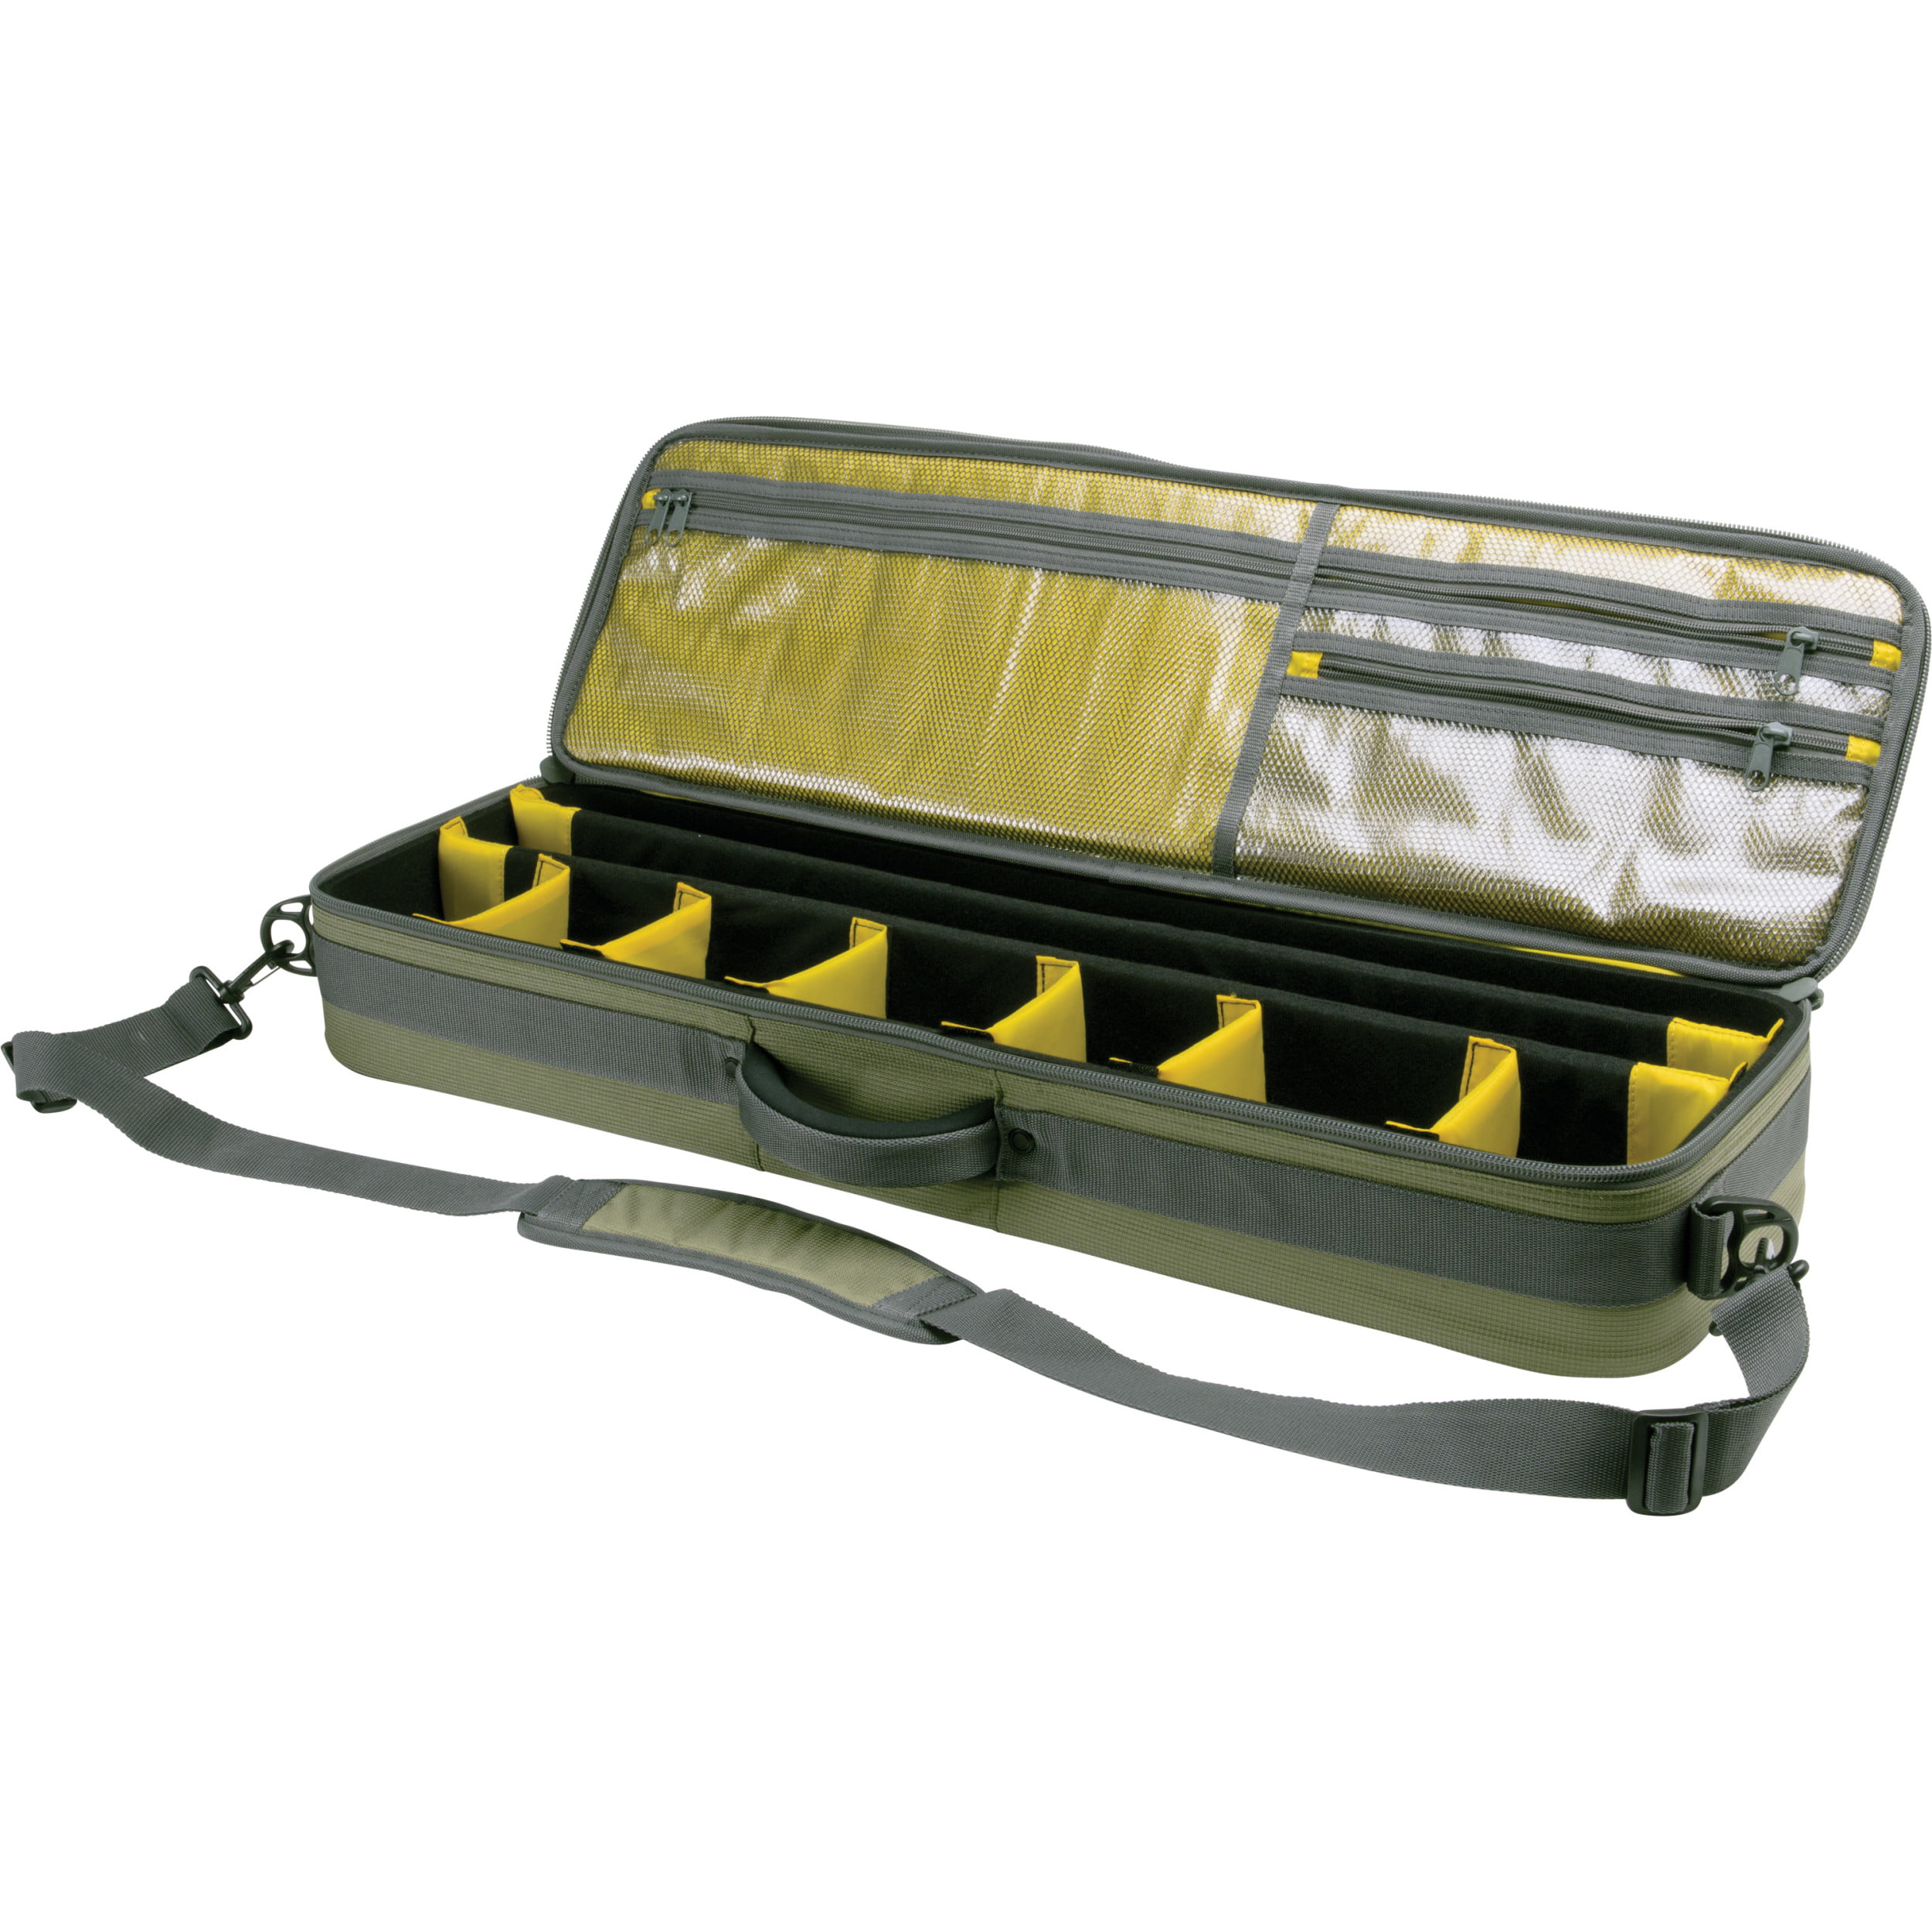 Allen Company Cottonwood Fly Fishing Rod And Gear Bag Case, Fits Up To 4 Fishing  Rods, Green 